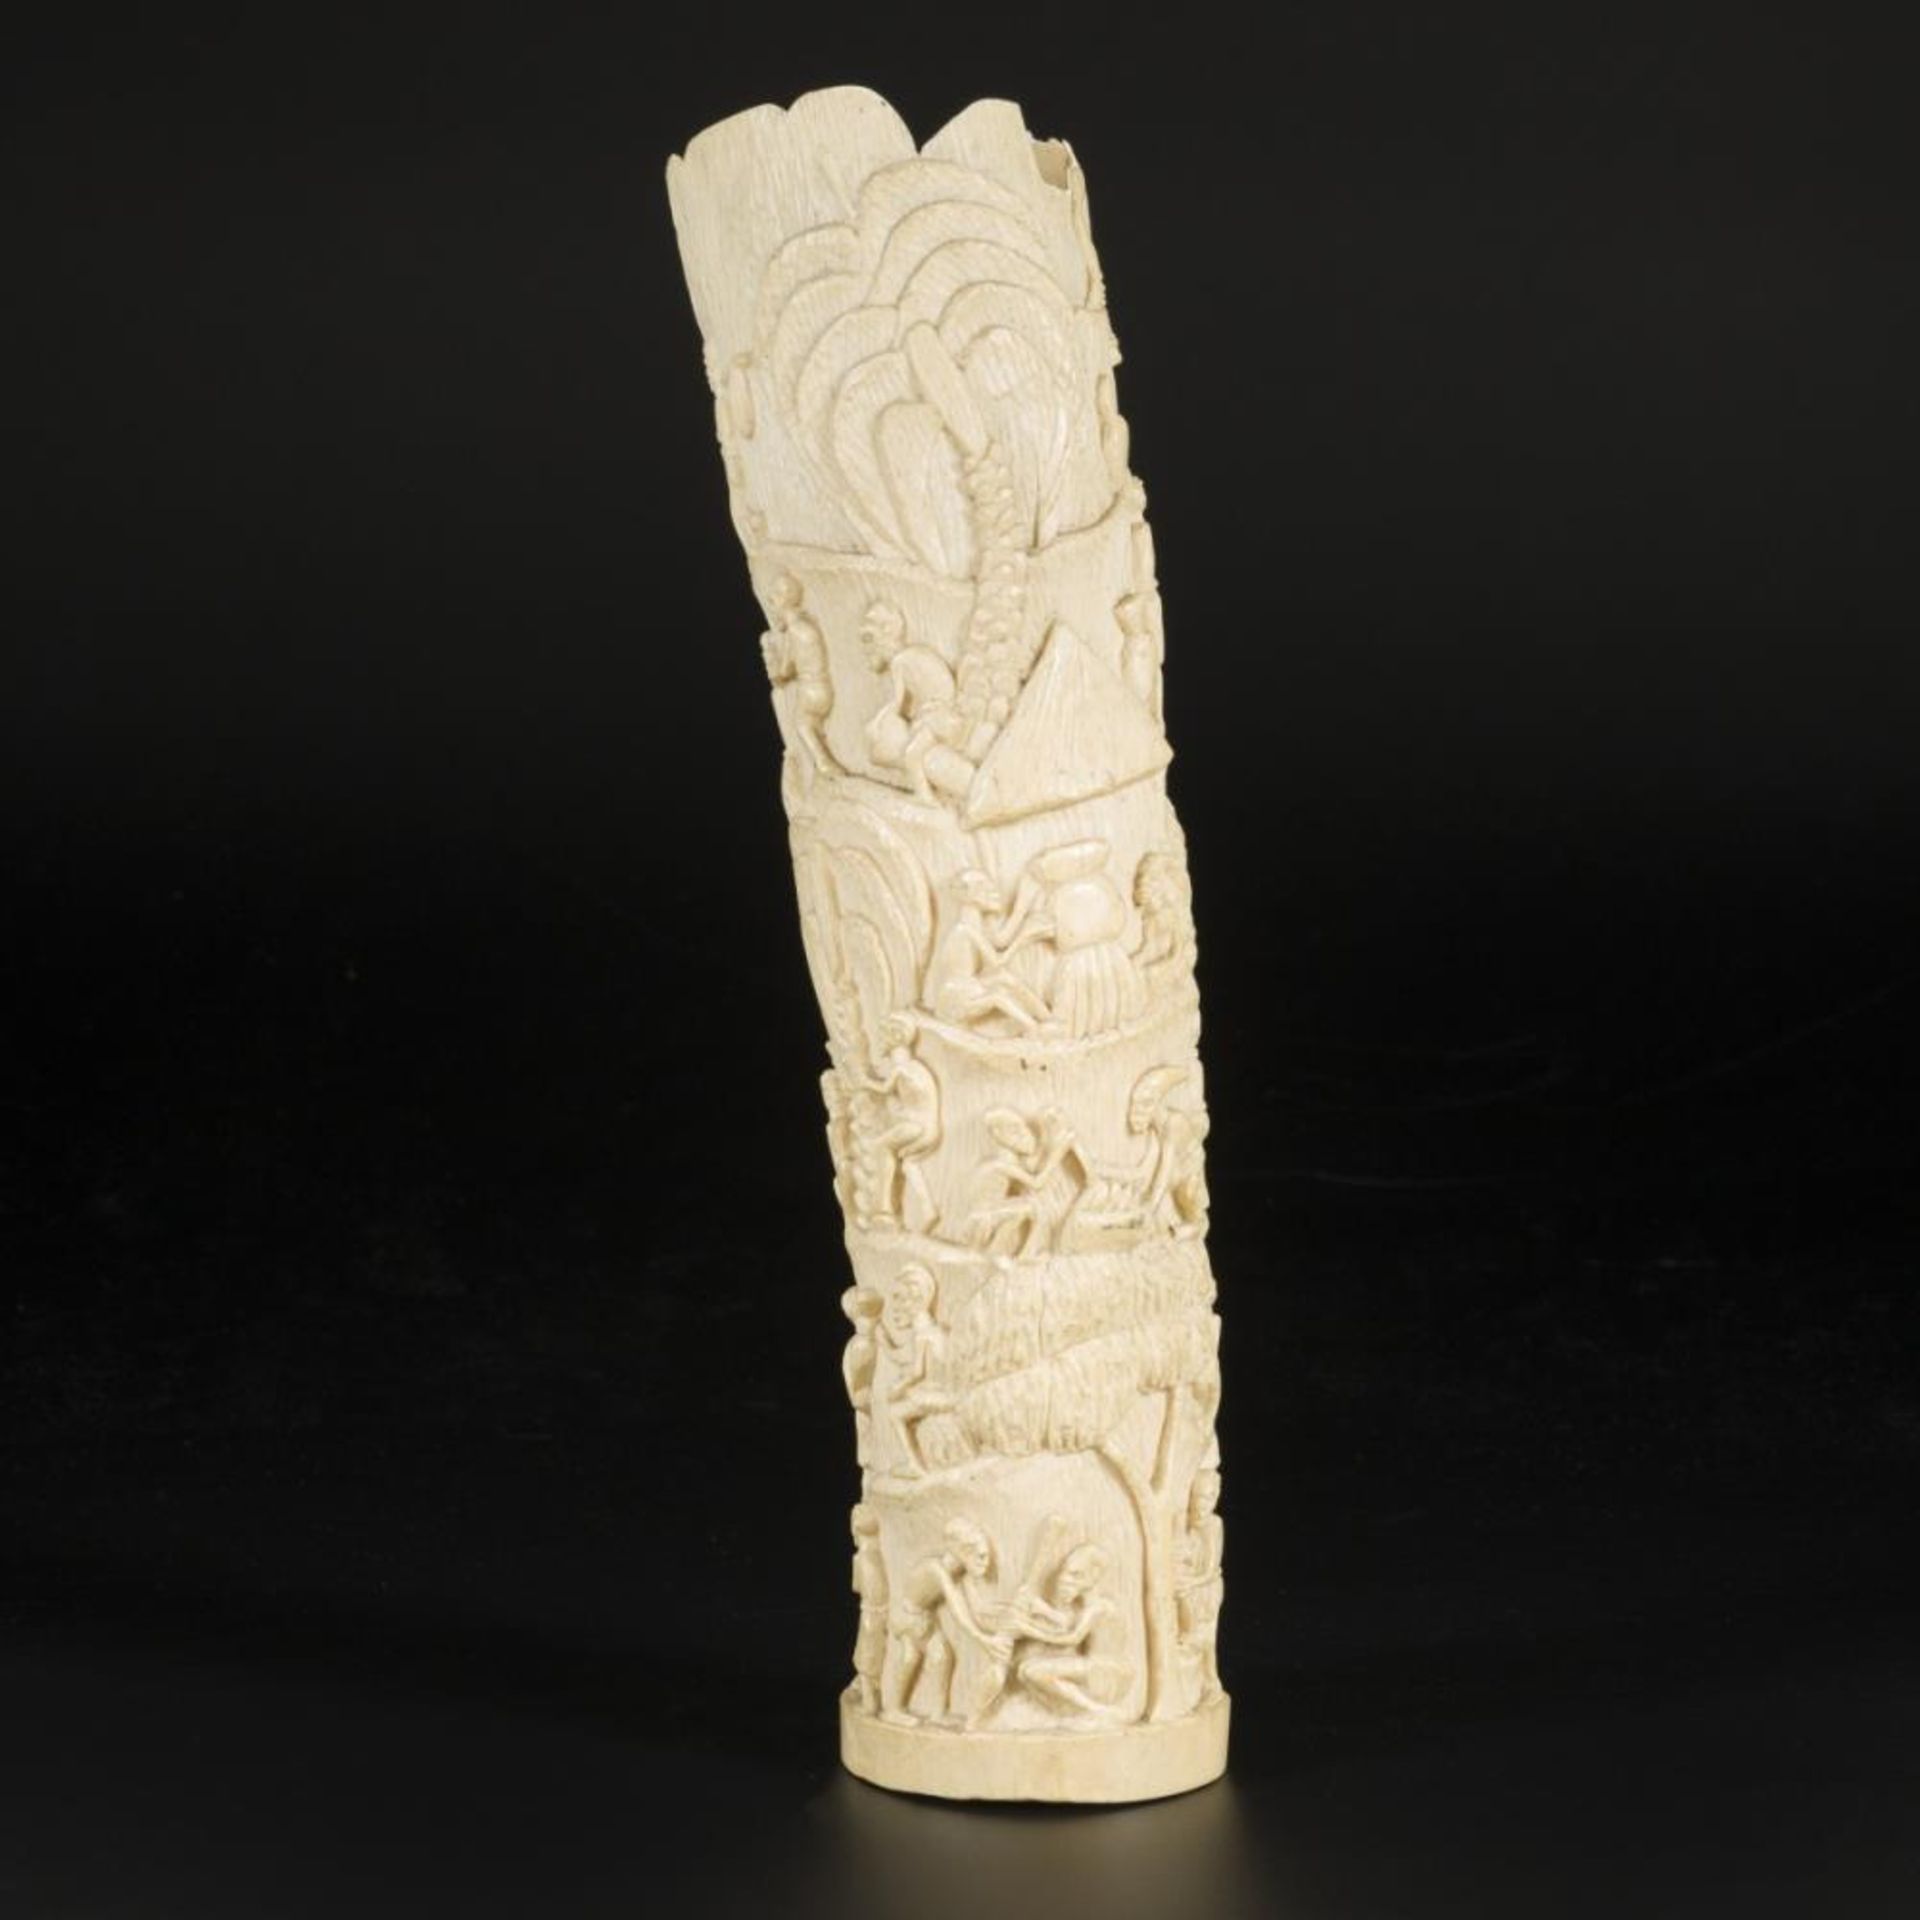 An ivory carving with depictions of African villagers, DRC, ca. 1920/30.